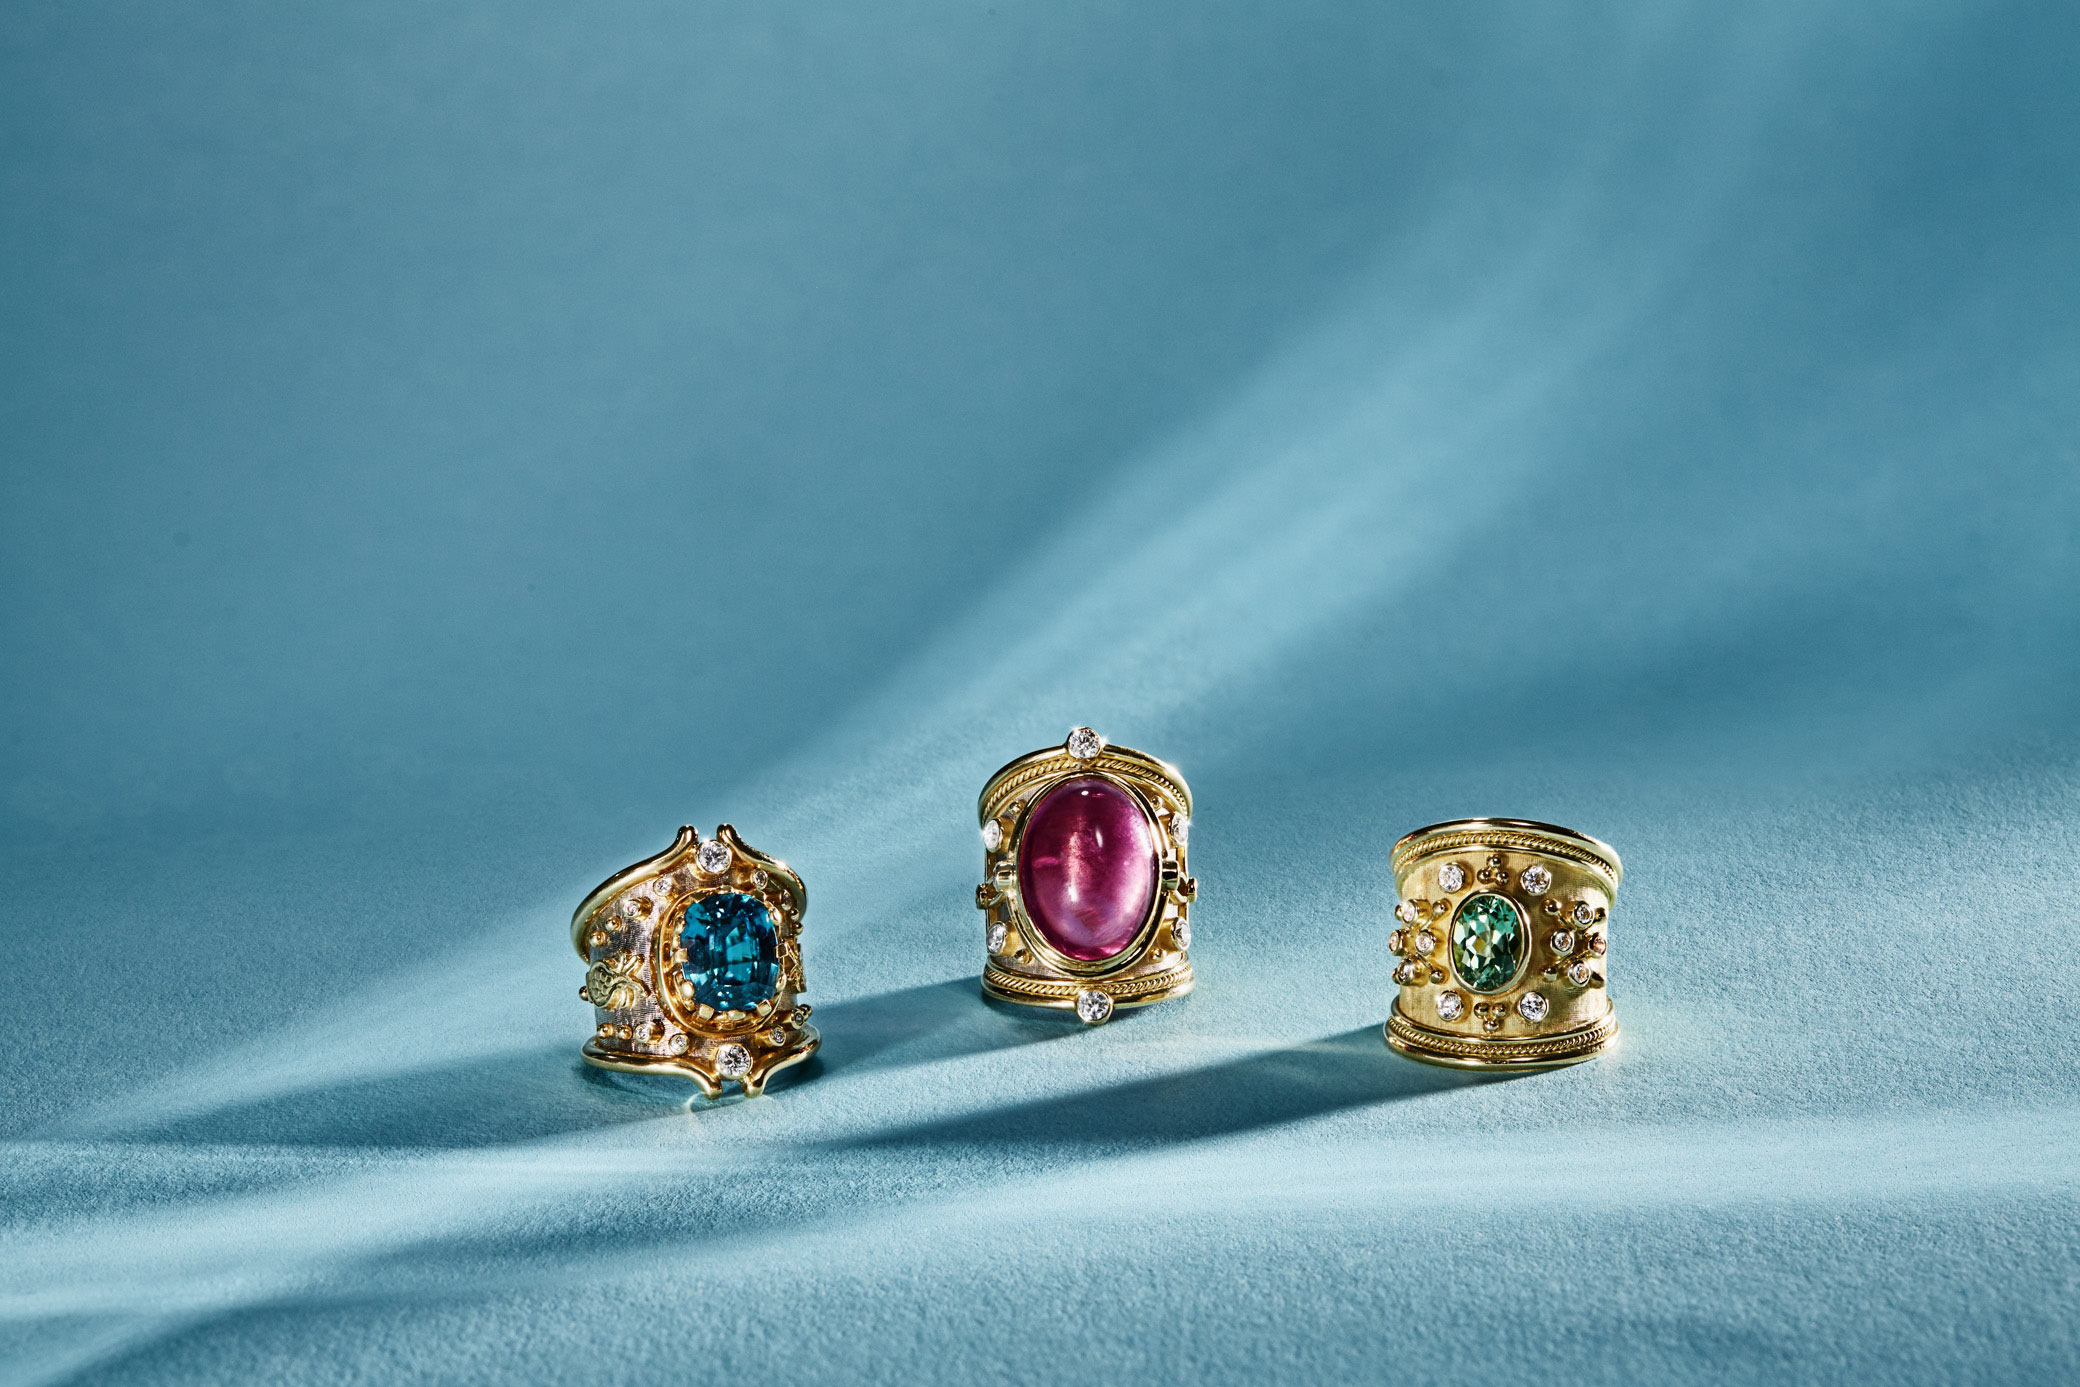 Jewellery photography - 3 templar rings on blue background with shafts of light.  Image shot in London studio for jewellers 